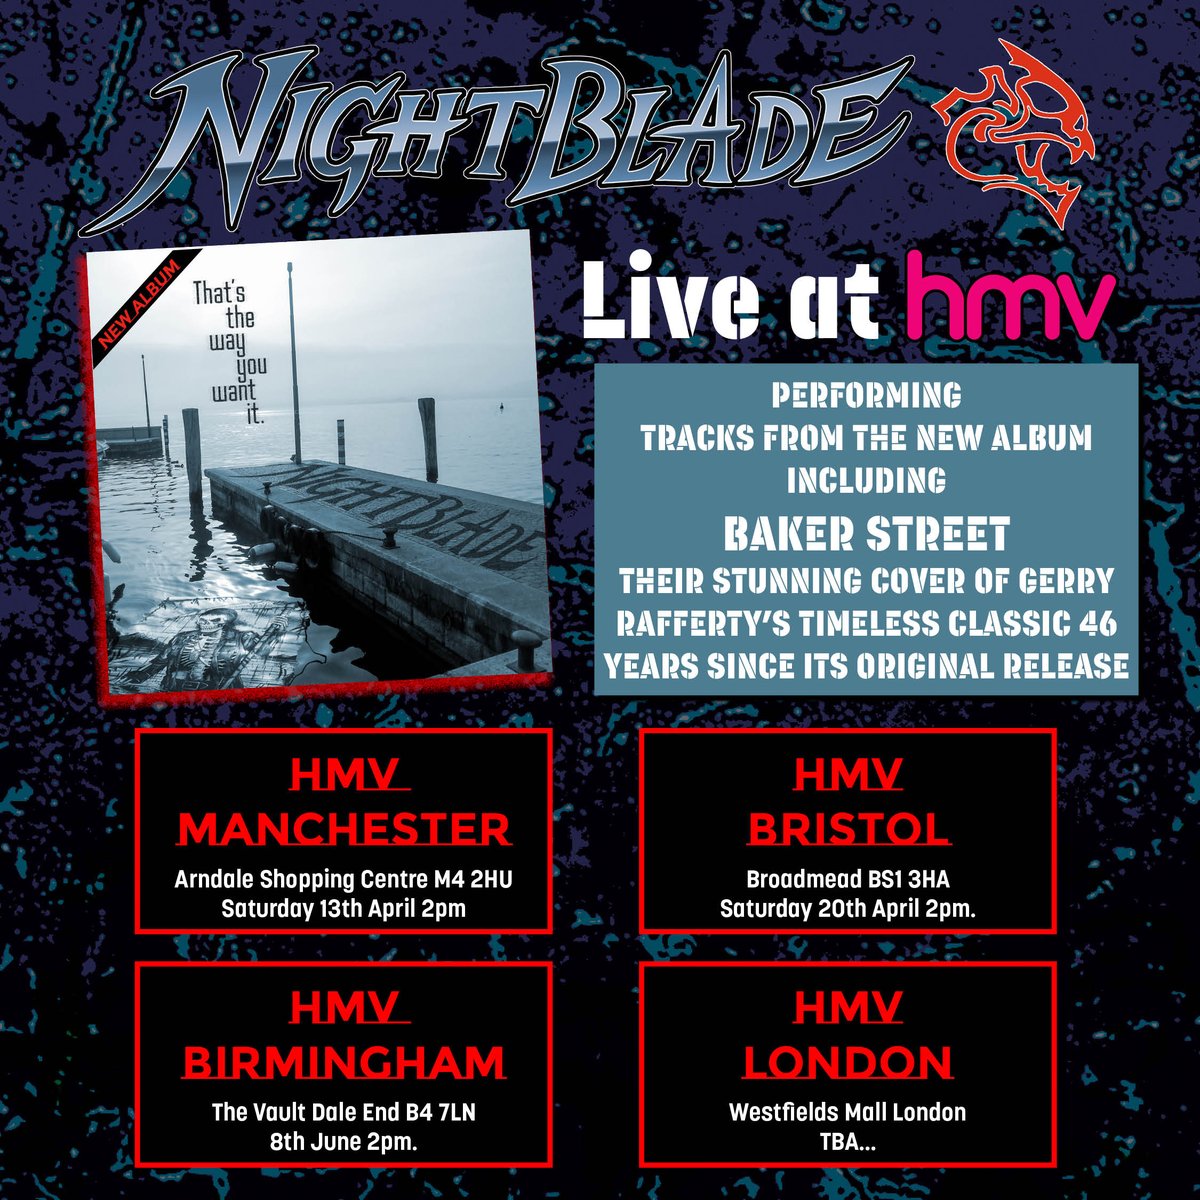 IT'S HAPPENING!! 💪🤘👊 Nightblade play live at these major HMV stores. Meet and greet the band. Get your CDs signed. Free entry.